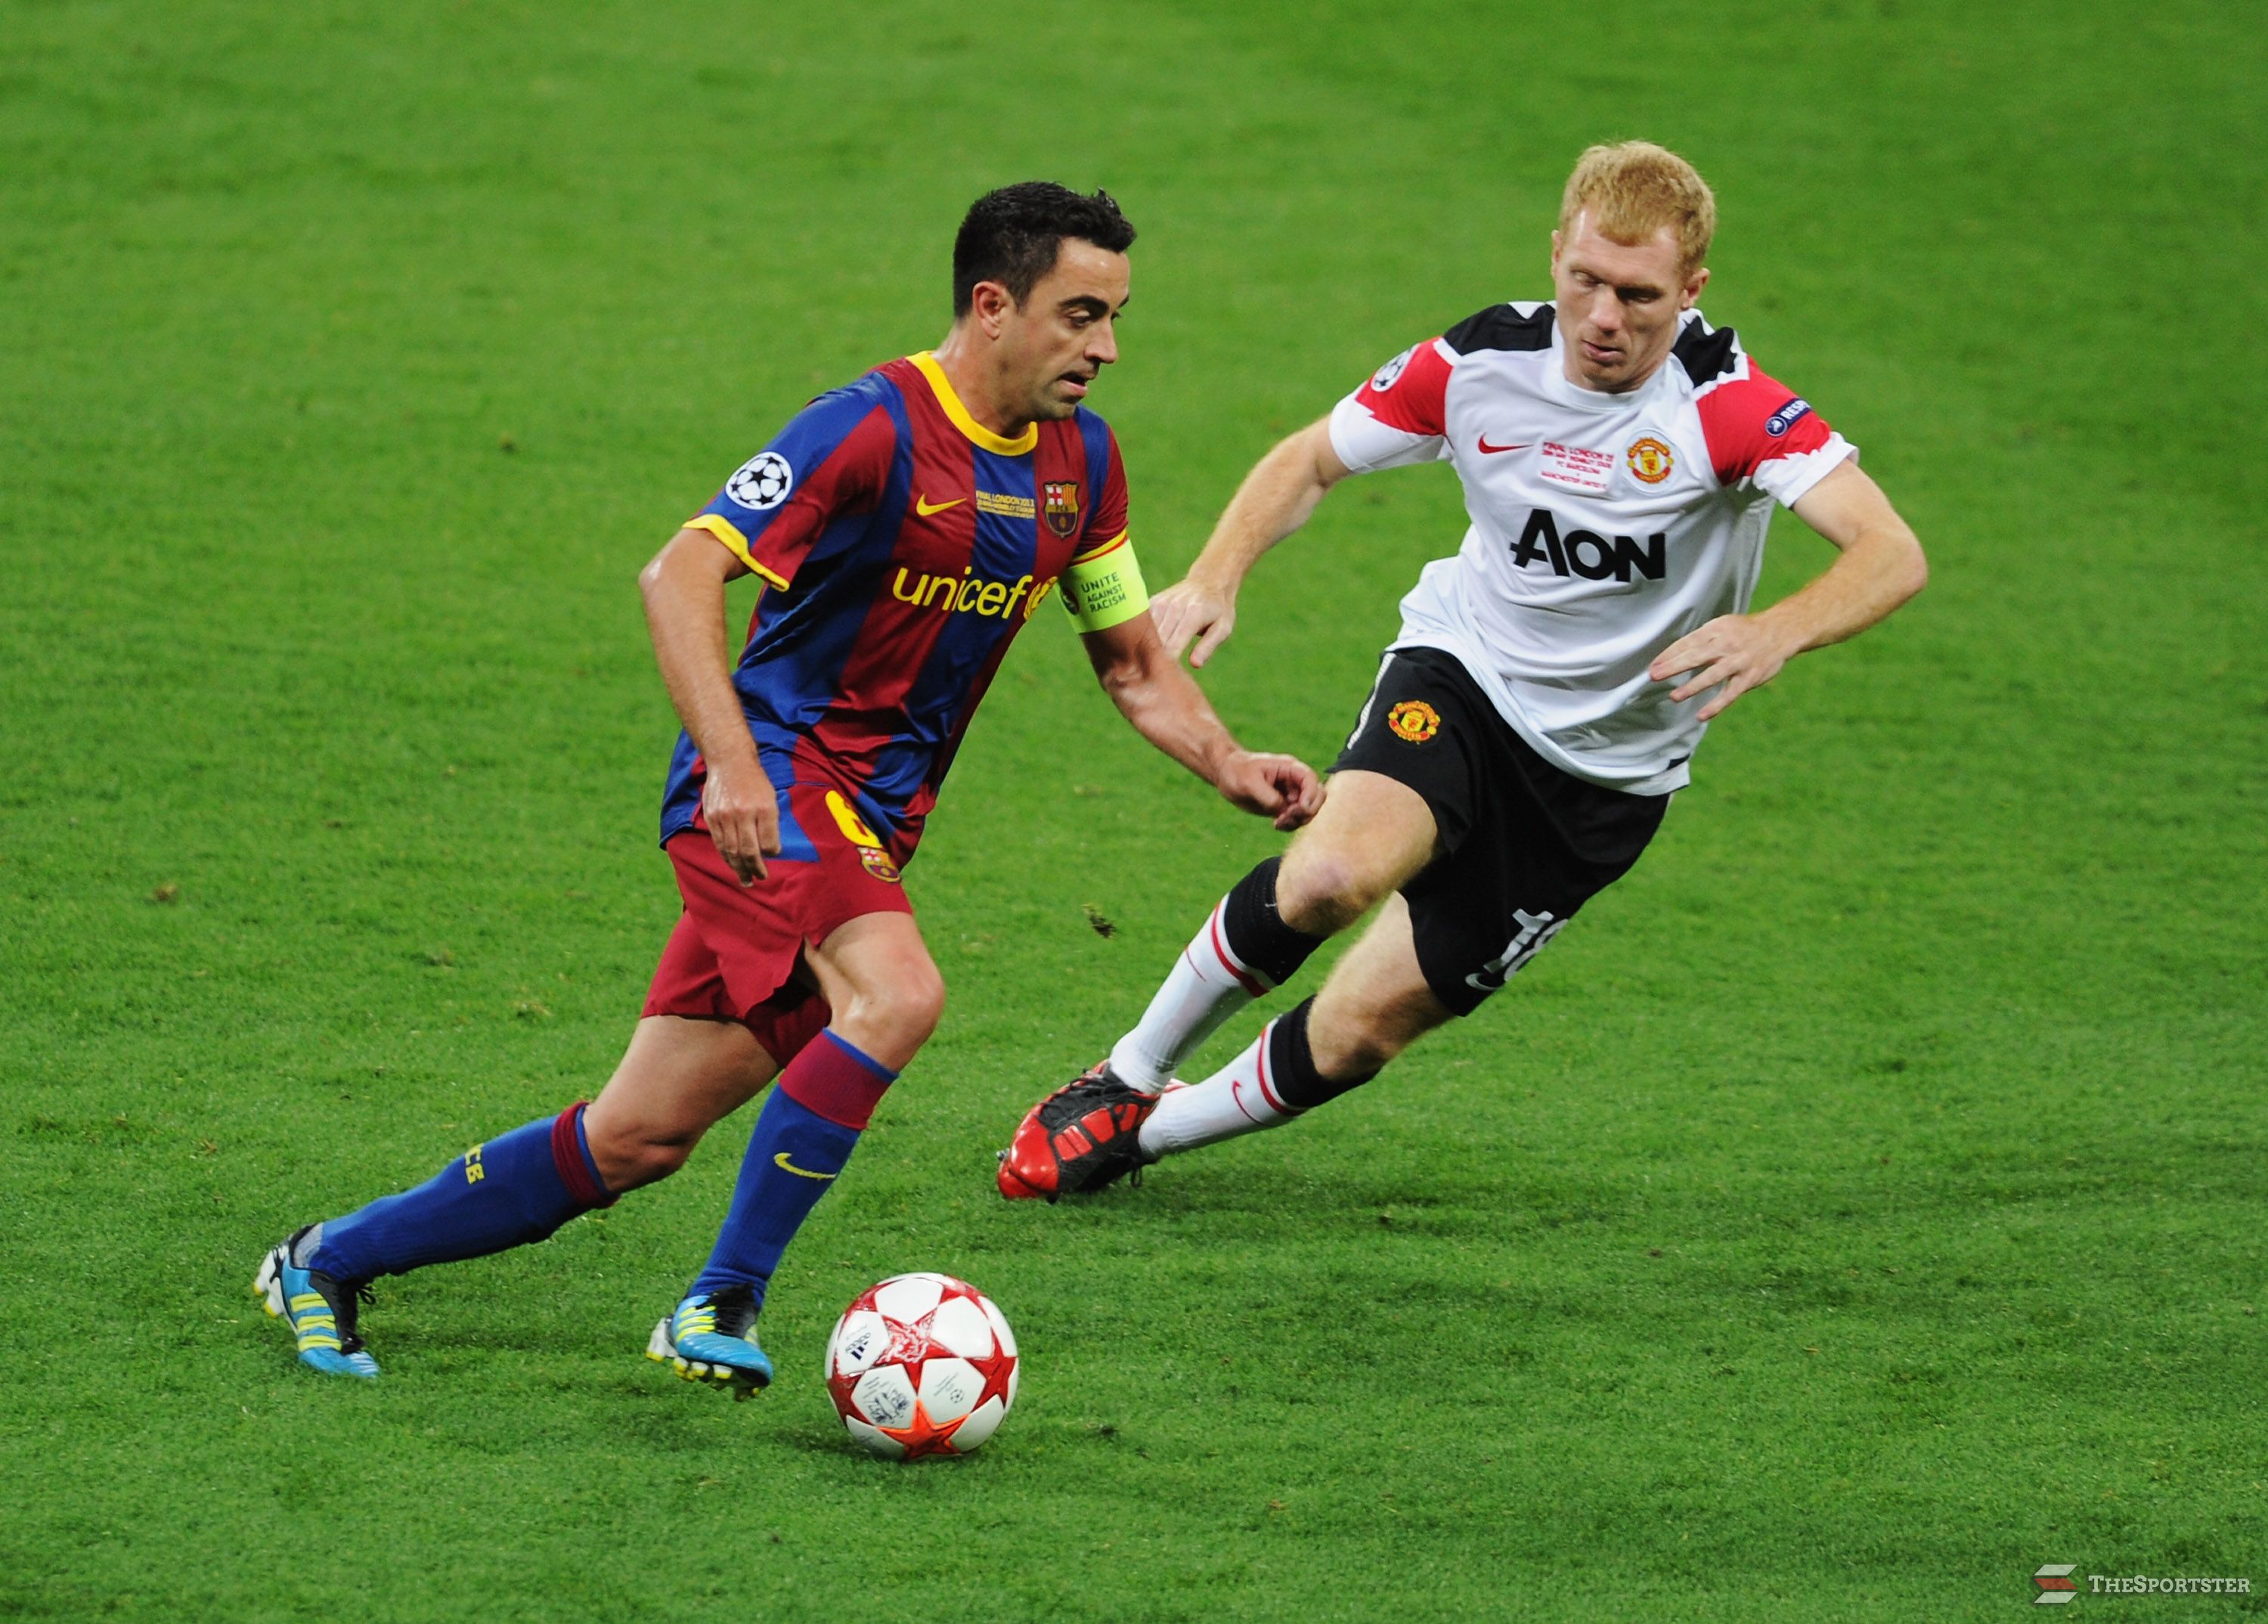 LONDON, ENGLAND - MAY 28: Xavi of FC Barcelona is watched by Paul Scholes of Manchester United during the UEFA Champions League final between FC Barcelona and Manchester United FC at Wembley Stadium on May 28, 2011 in London, England. (Photo by Michael Regan/Getty Images)